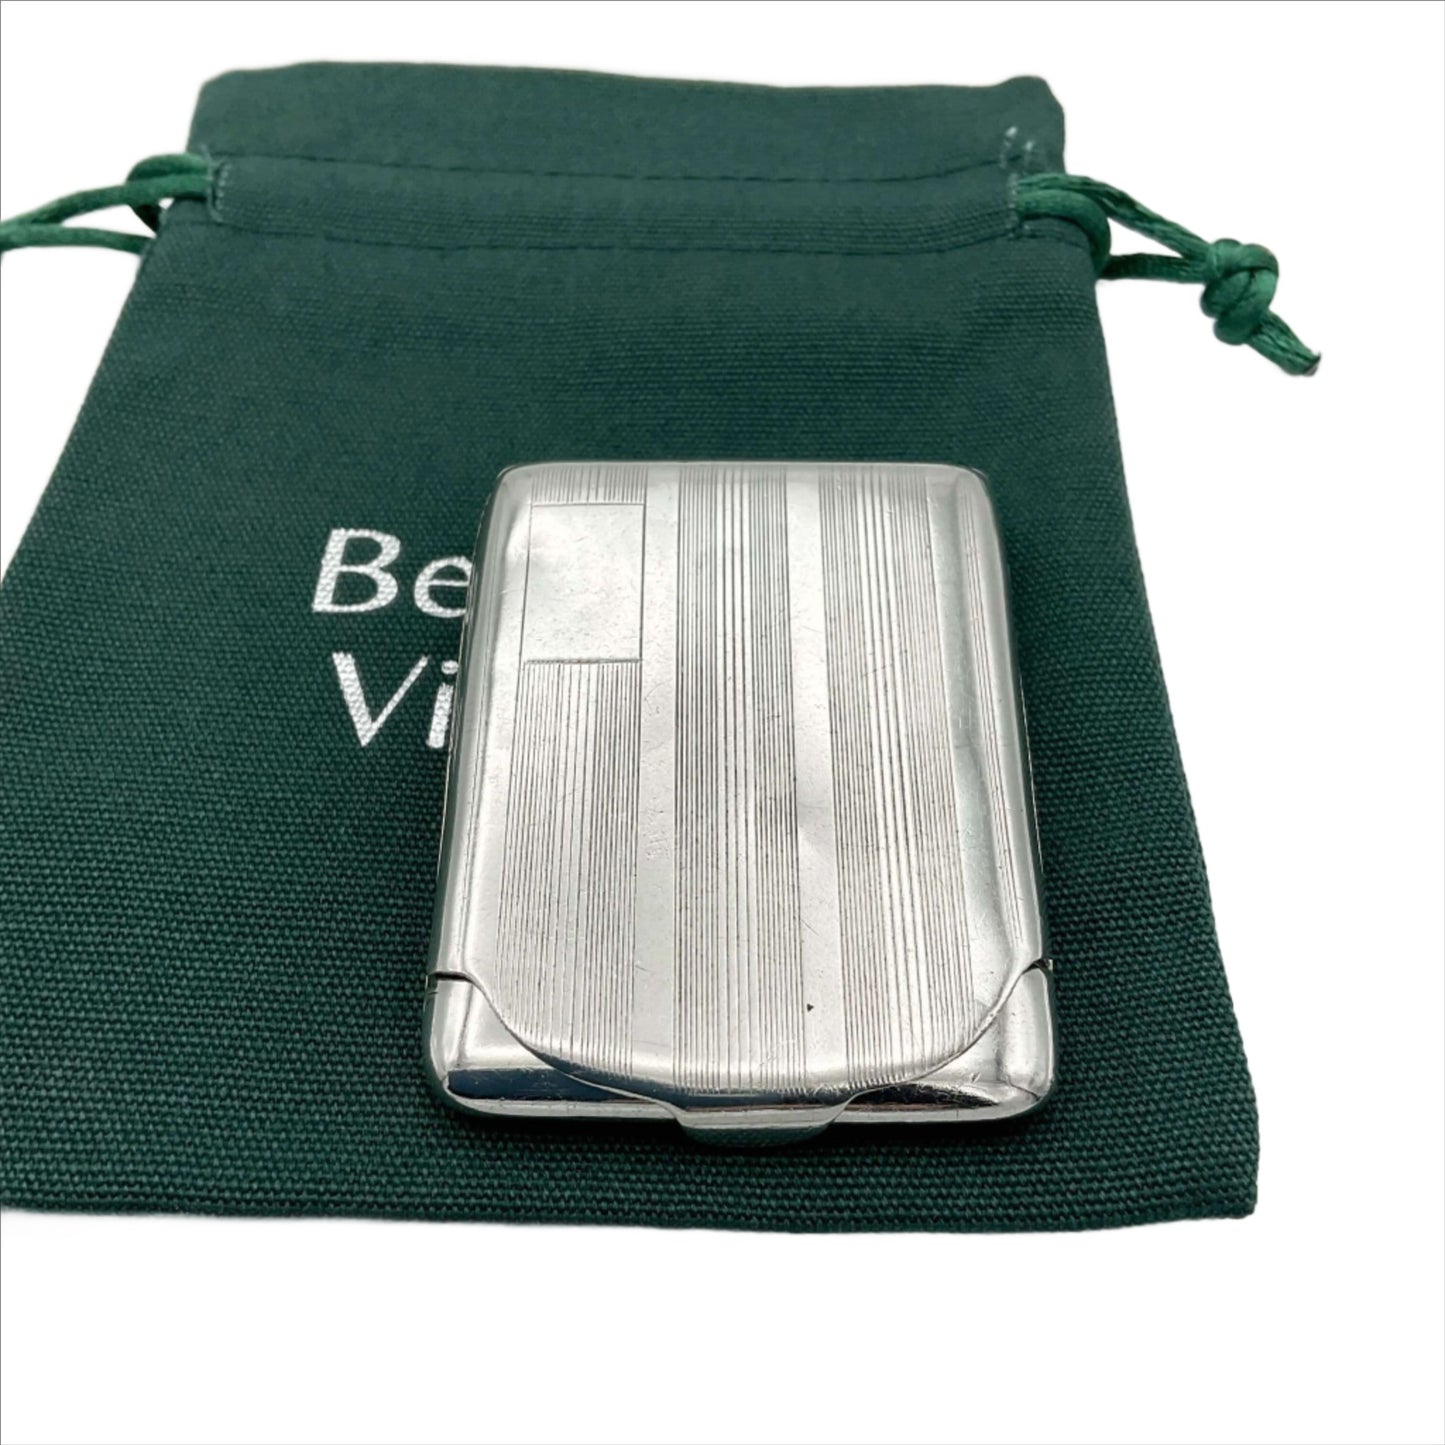 Silver matchbook case with a lined pattern and blank box for engraving initials in left hand corner. Case is on green Beeches Vintage cotton bag.